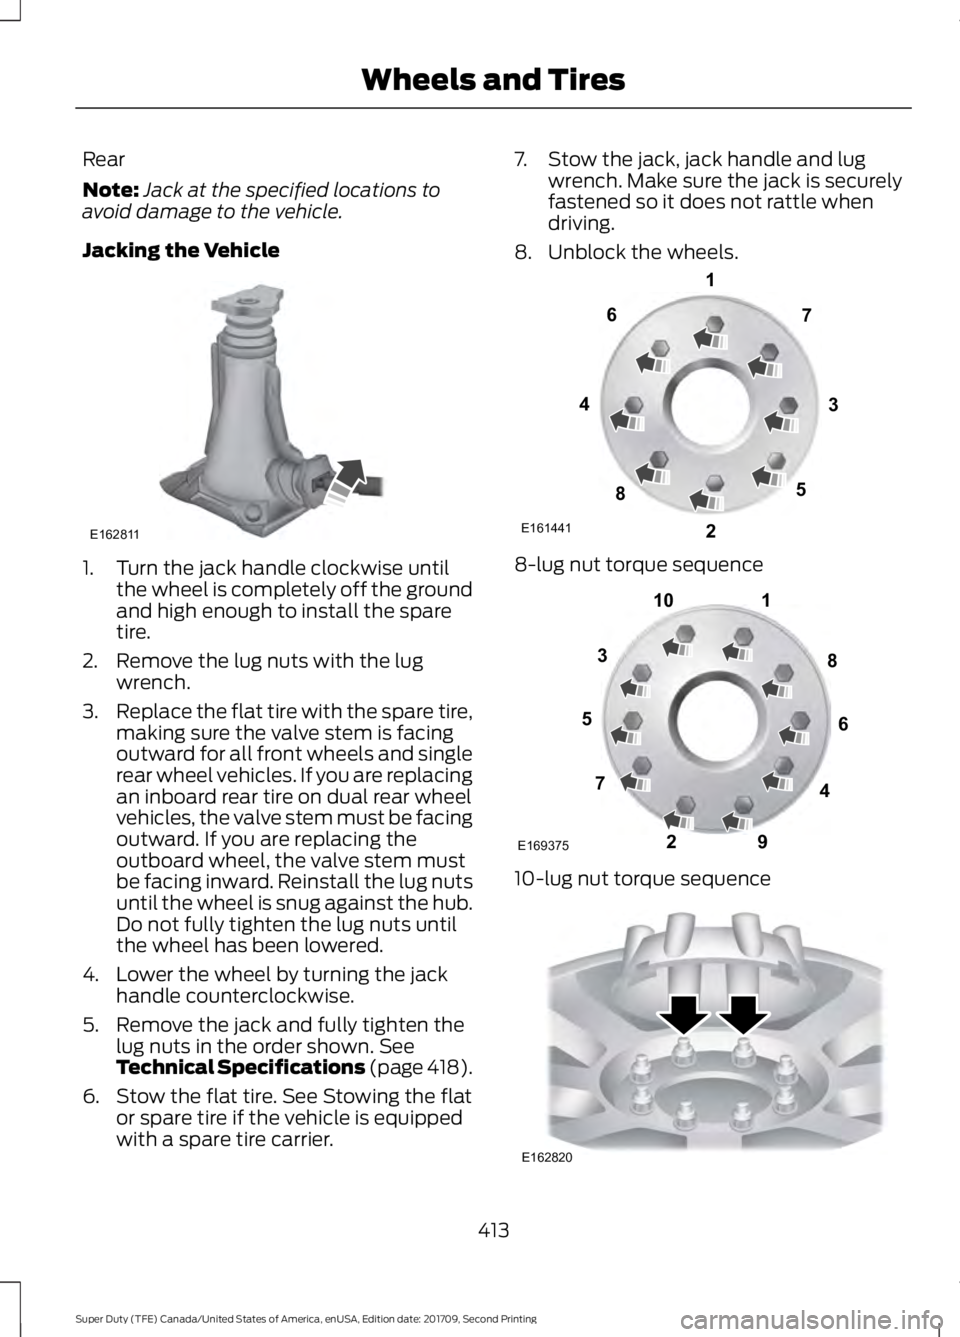 FORD F-550 2018  Owners Manual Rear
Note:
Jack at the specified locations to
avoid damage to the vehicle.
Jacking the Vehicle 1. Turn the jack handle clockwise until
the wheel is completely off the ground
and high enough to install